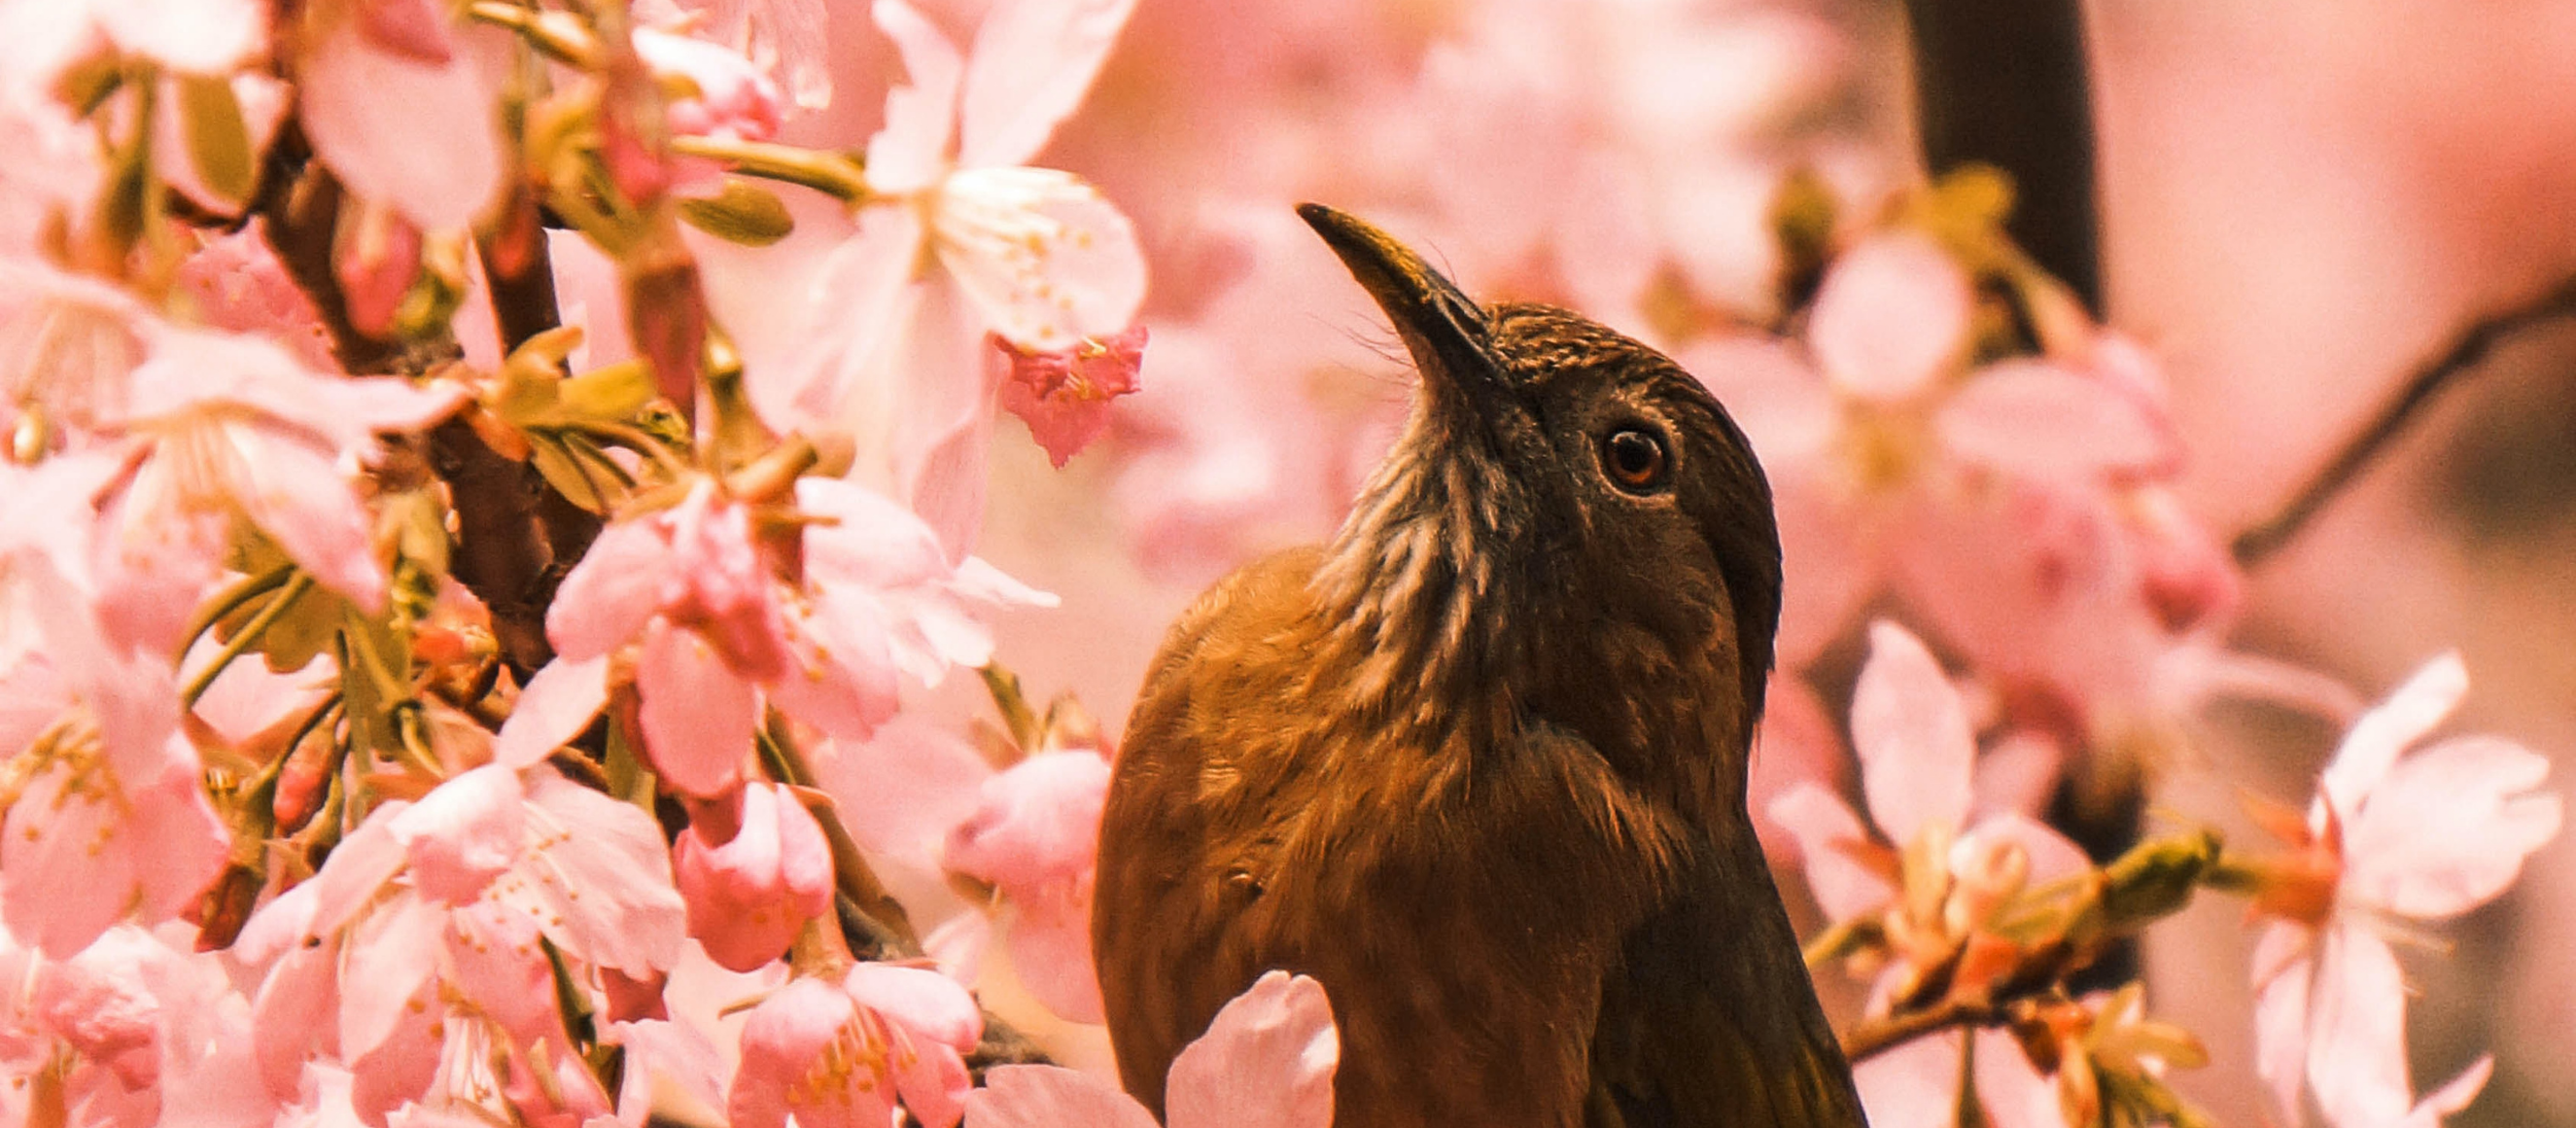 Photo of a bird sitting among flowers looking up